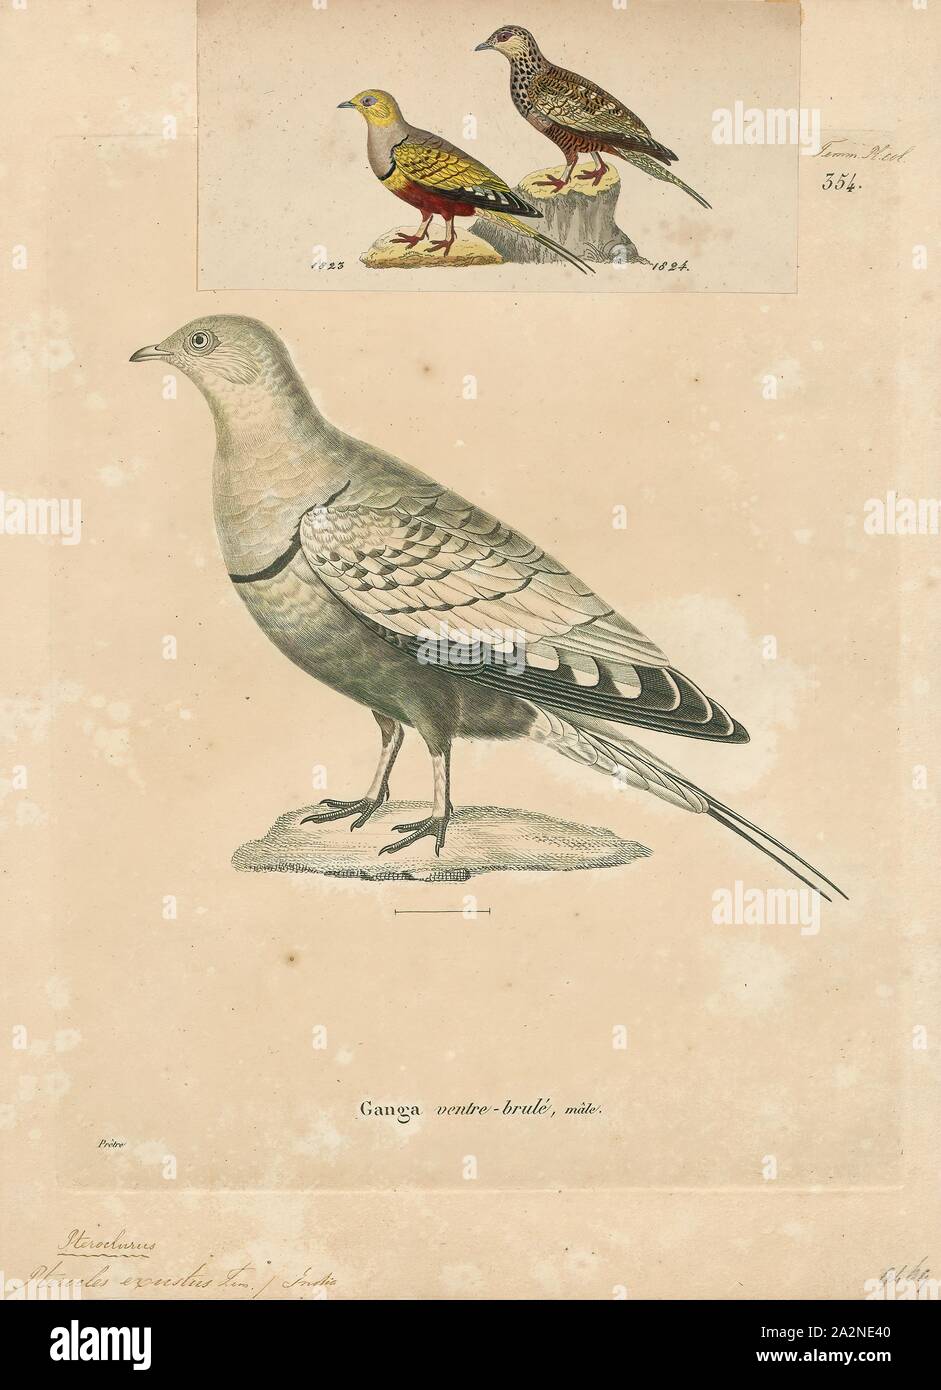 Pterocles exustus, Print, The chestnut-bellied sandgrouse (Pterocles exustus) is a species of sandgrouse. They are found in sparse, bushy, arid land which is common in central and northern Africa, and southern Asia. Though they live in hot, arid climates, they are highly reliant on water. They have been known to travel up to 80 kilometres (50 mi) in one day in search of water. All species of sandgrouse that have been studied in habitat have proved to be entirely vegetarian throughout their lives, specialising in leguminous weed seeds and seldom eating grass seeds., 1700-1880 Stock Photo